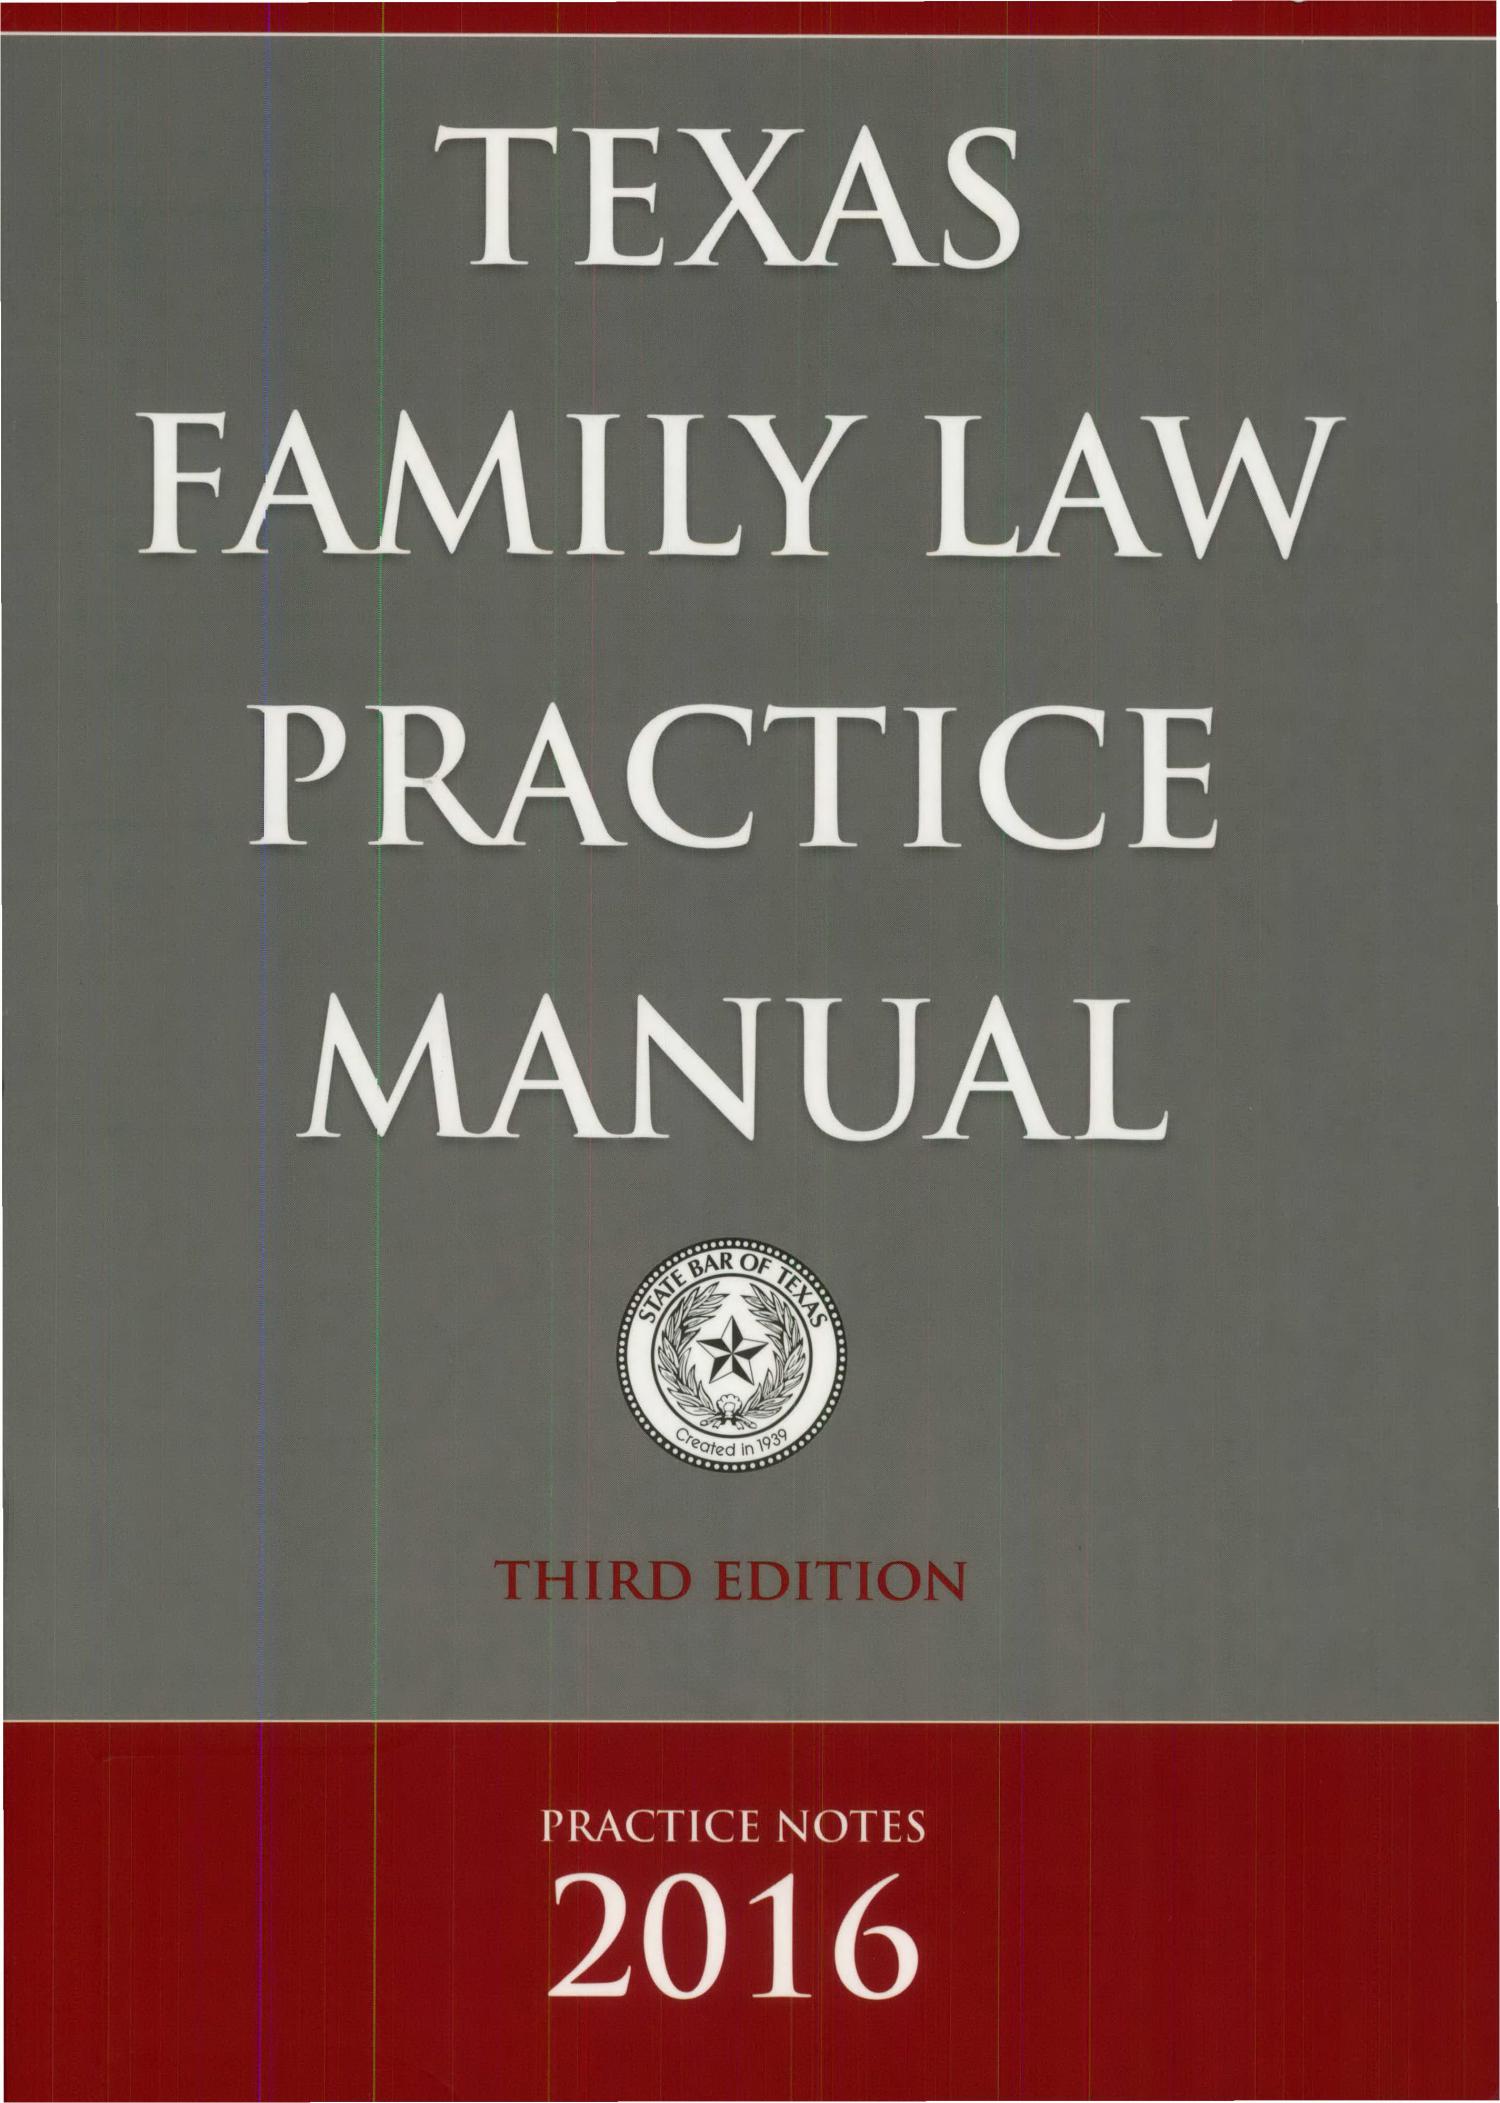 Texas Family Law Practice Manual Third Edition 2016 Practice Notes 